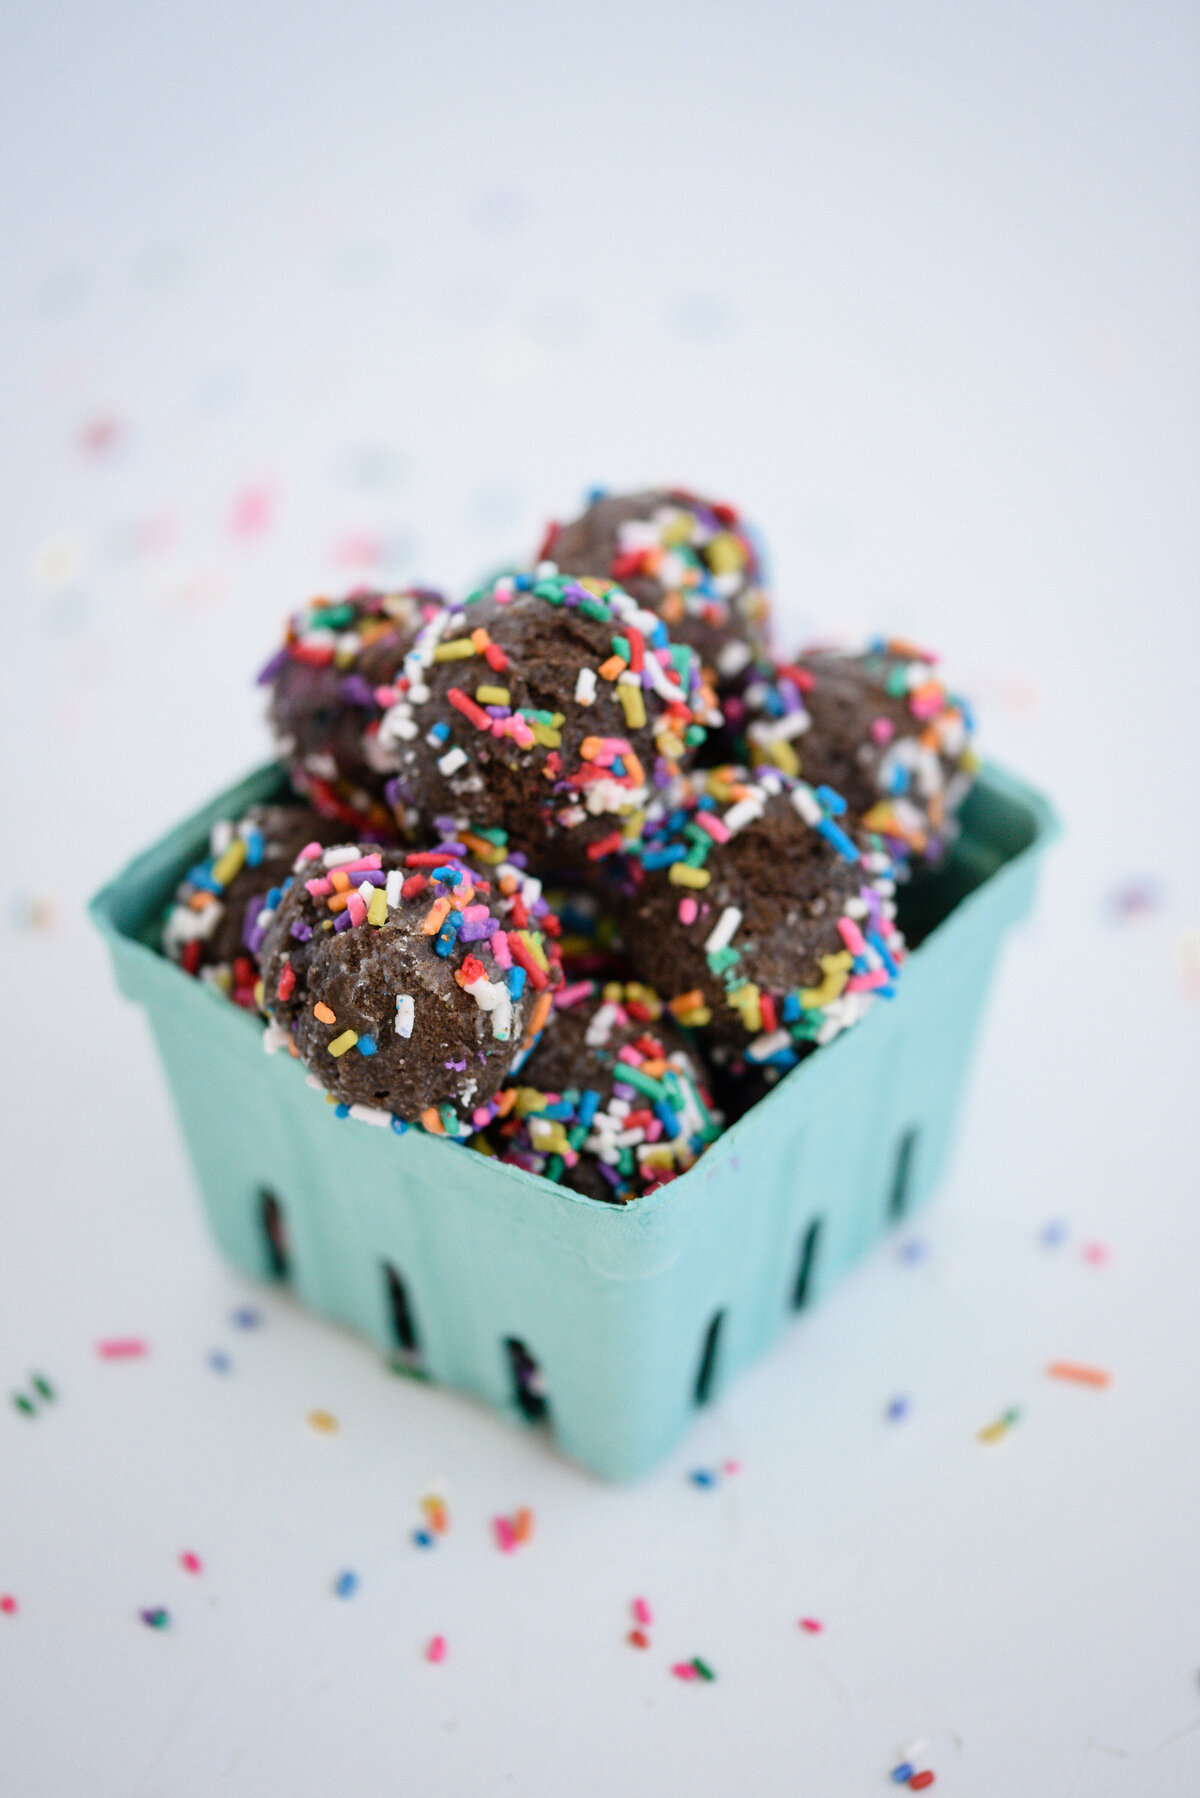 A product photographer near me takes a photo of a teal container holding chocolate donut holes with colored sprinkles all around